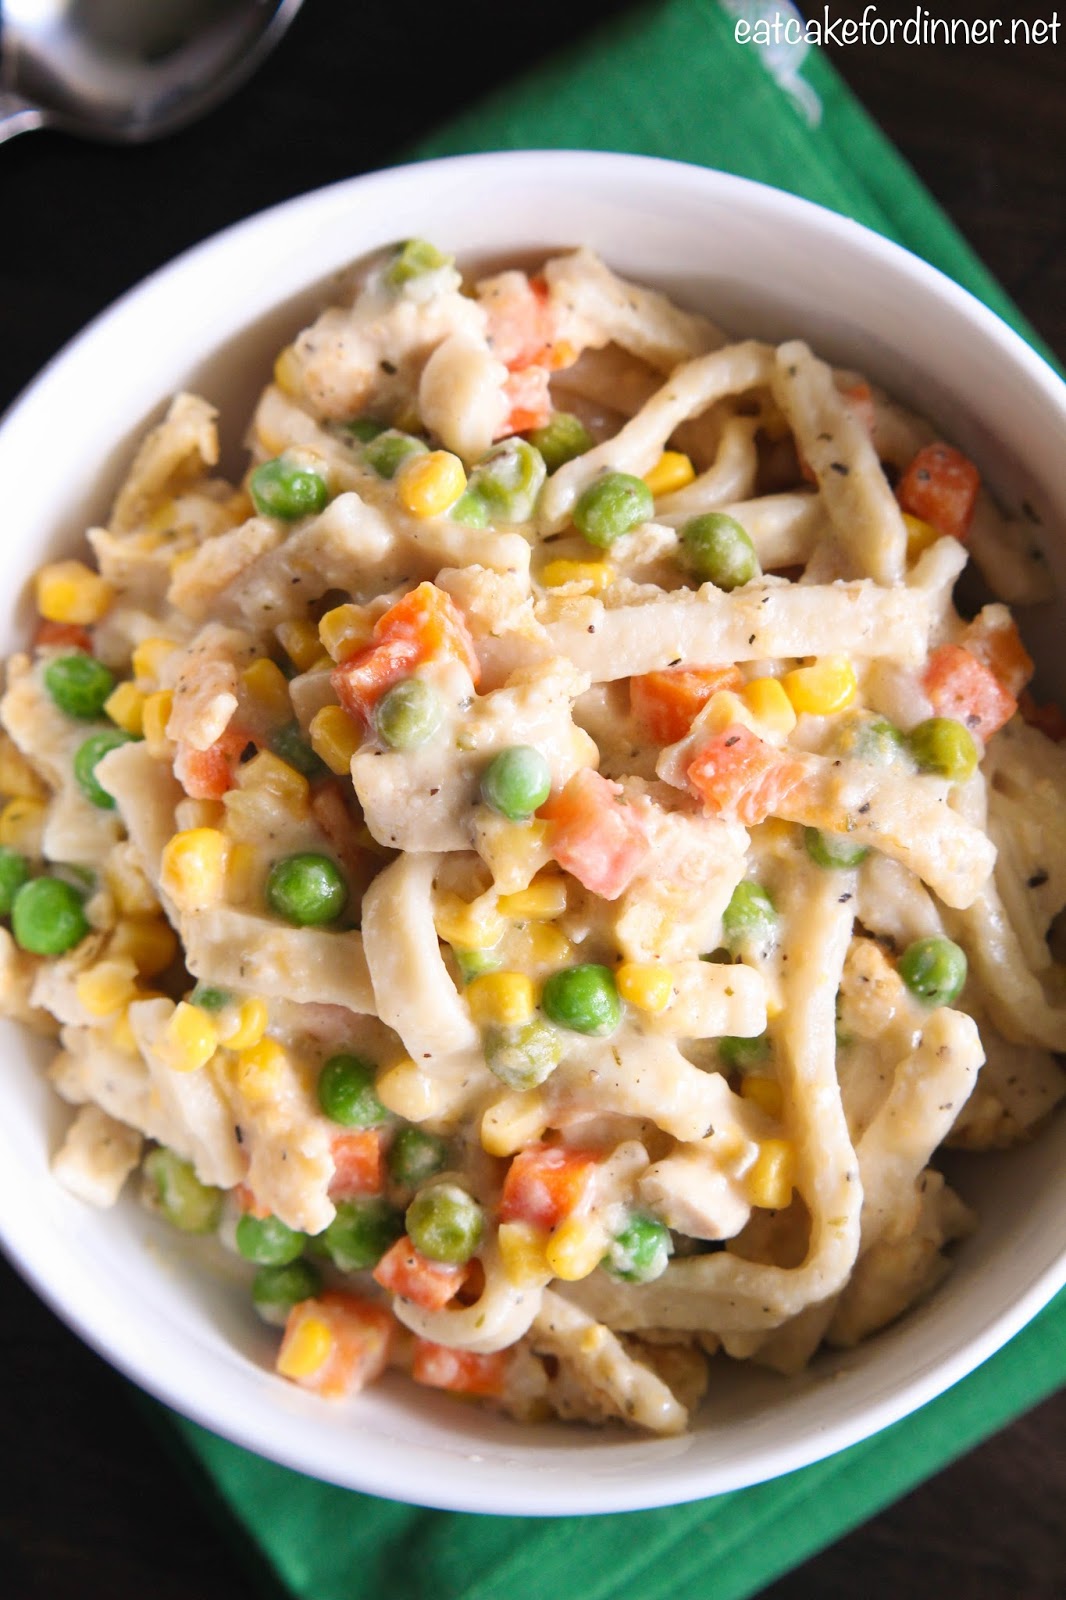 Eat Cake For Dinner: Creamy Chicken Noodle Casserole